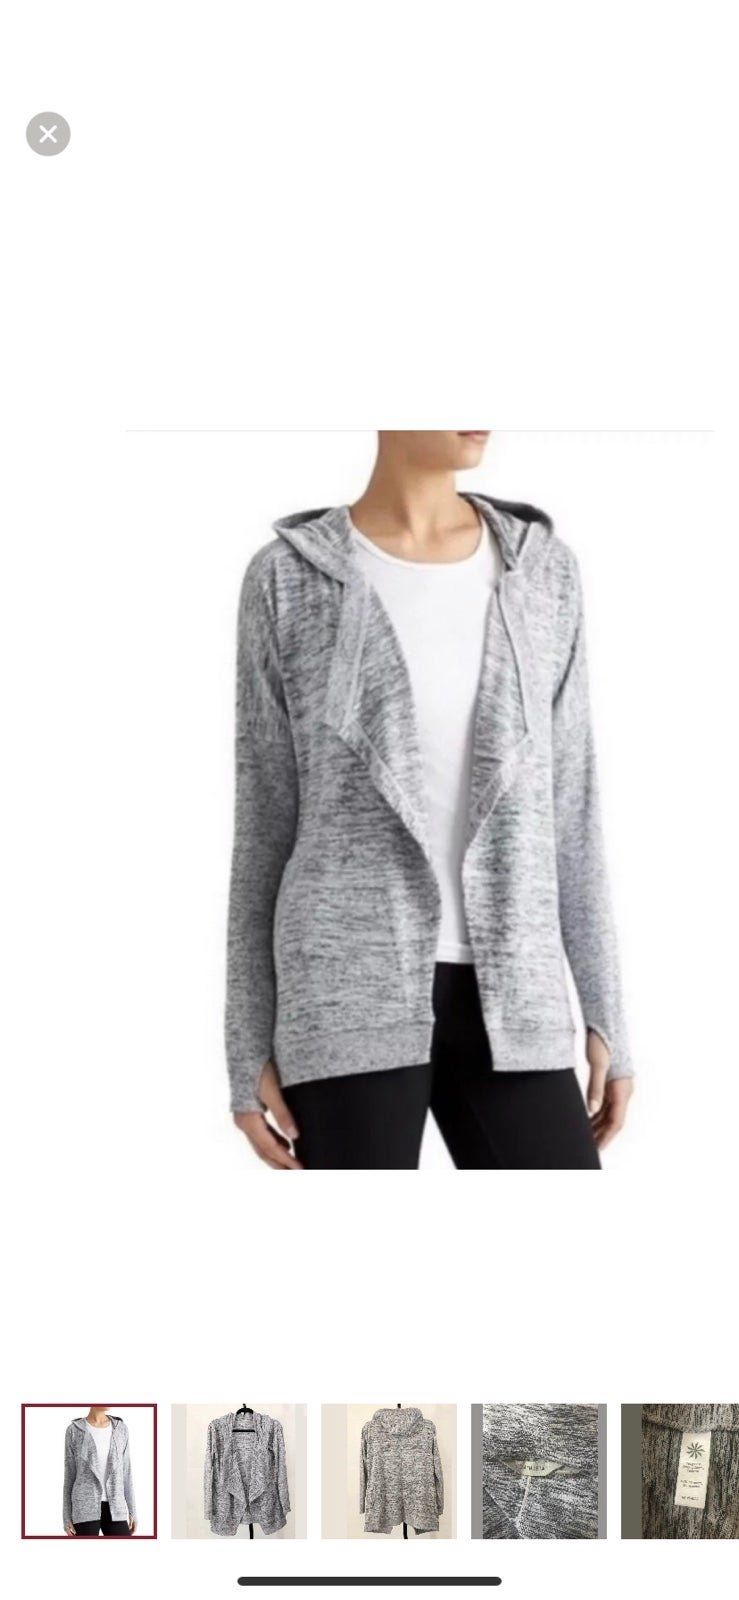 cheapest place to buy  NWOT Athleta Blissful Gray Open 